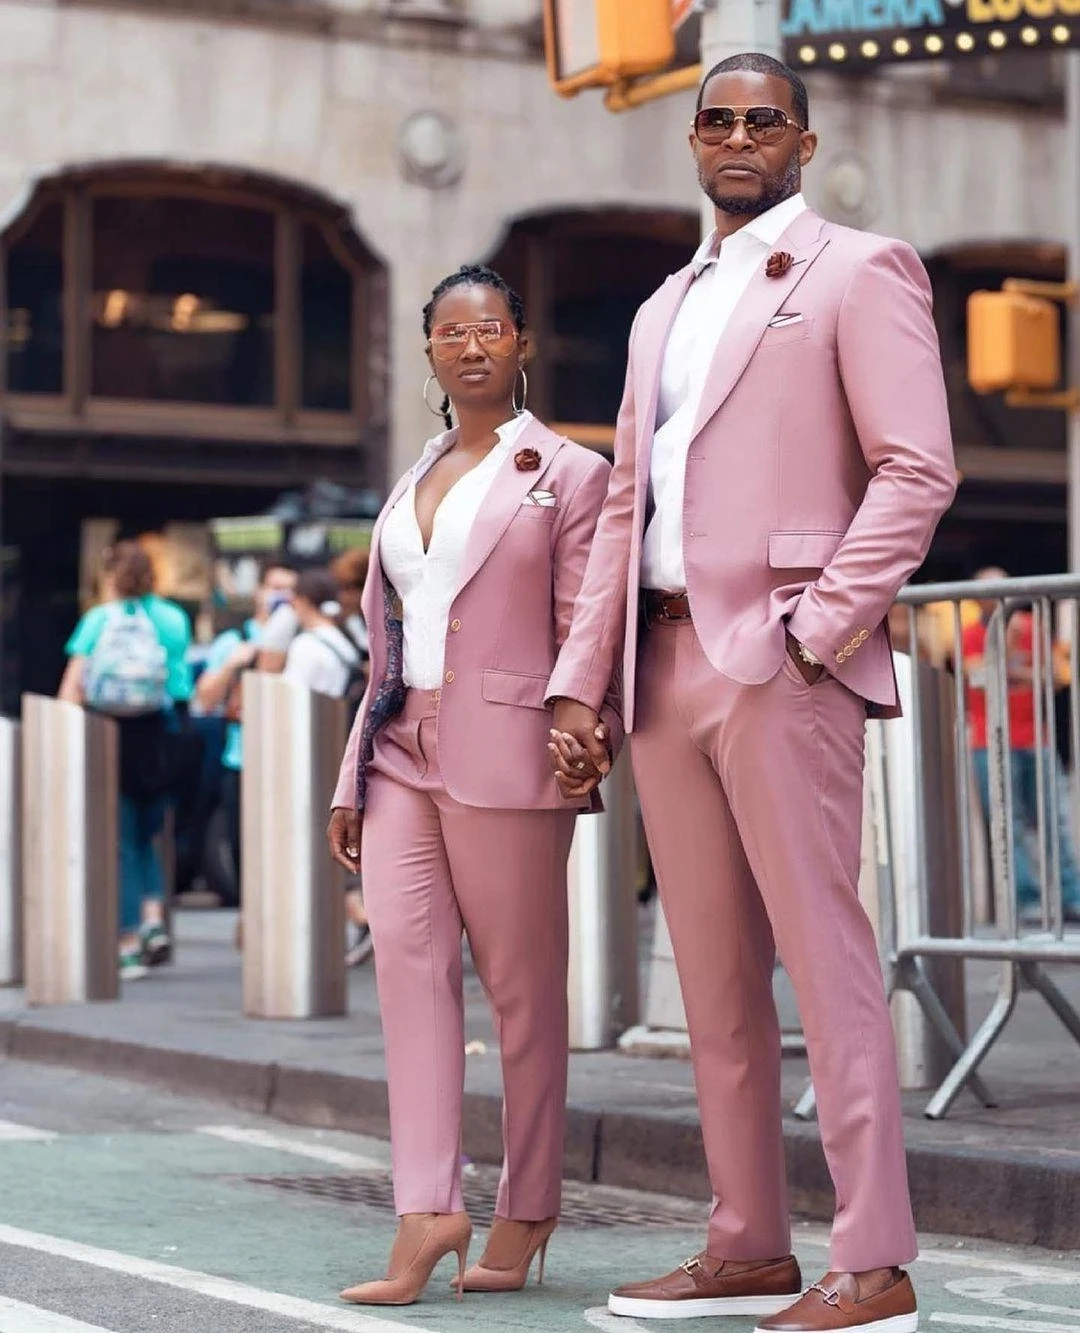 

2022 Hot Sell Couples Pink Costume Homme Mens Suits Groomsmen Wedding Tuxedos Terno Masculino Slim Fit Prom 2Pcs (Jacket+Pants)